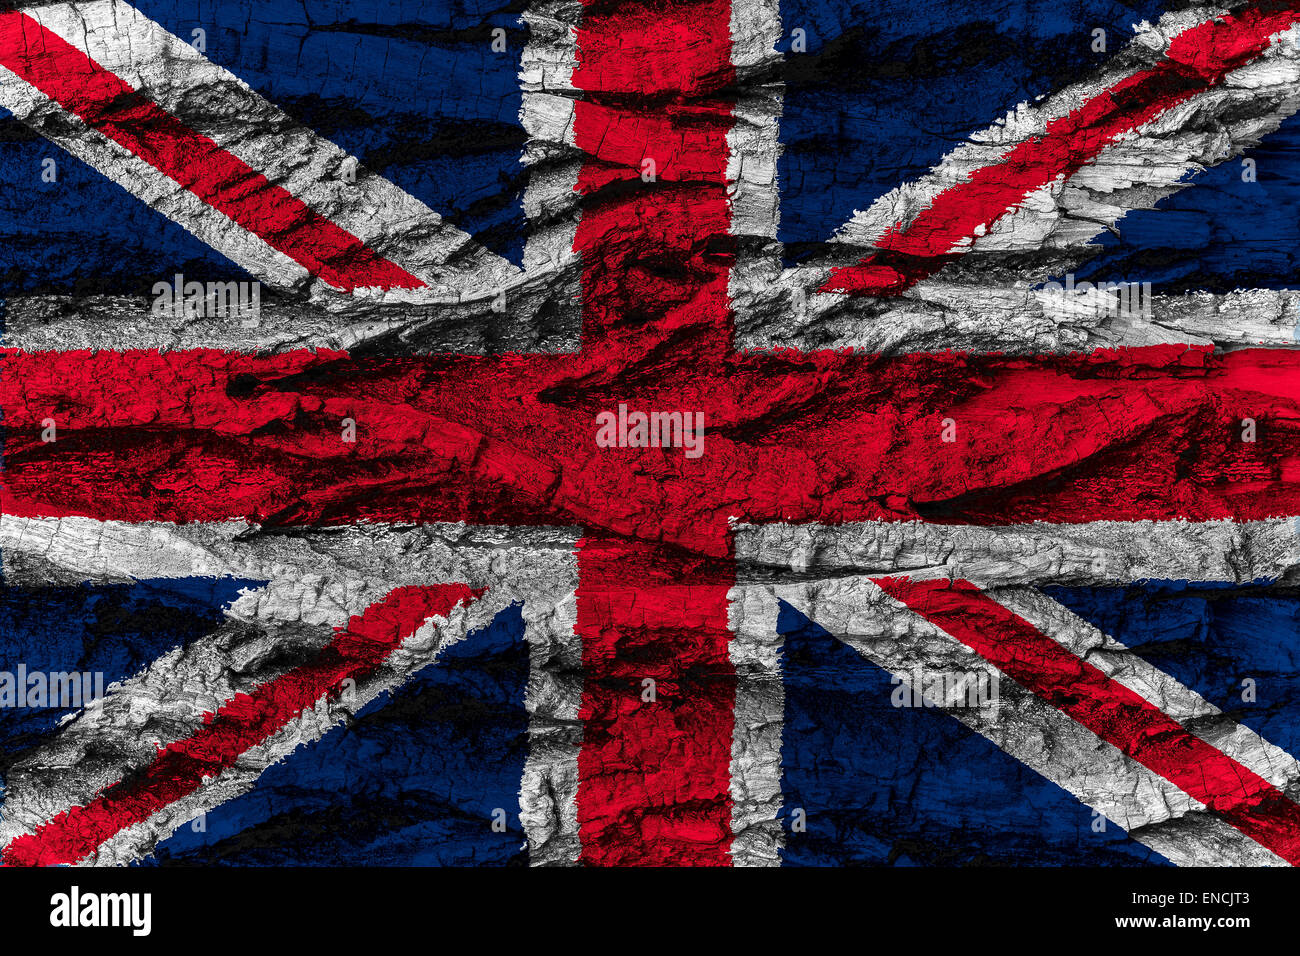 United Kingdom of Great Britain, Union Jack national flag painted on wooden bark of tree. Painting is rough and colorful. Stock Photo